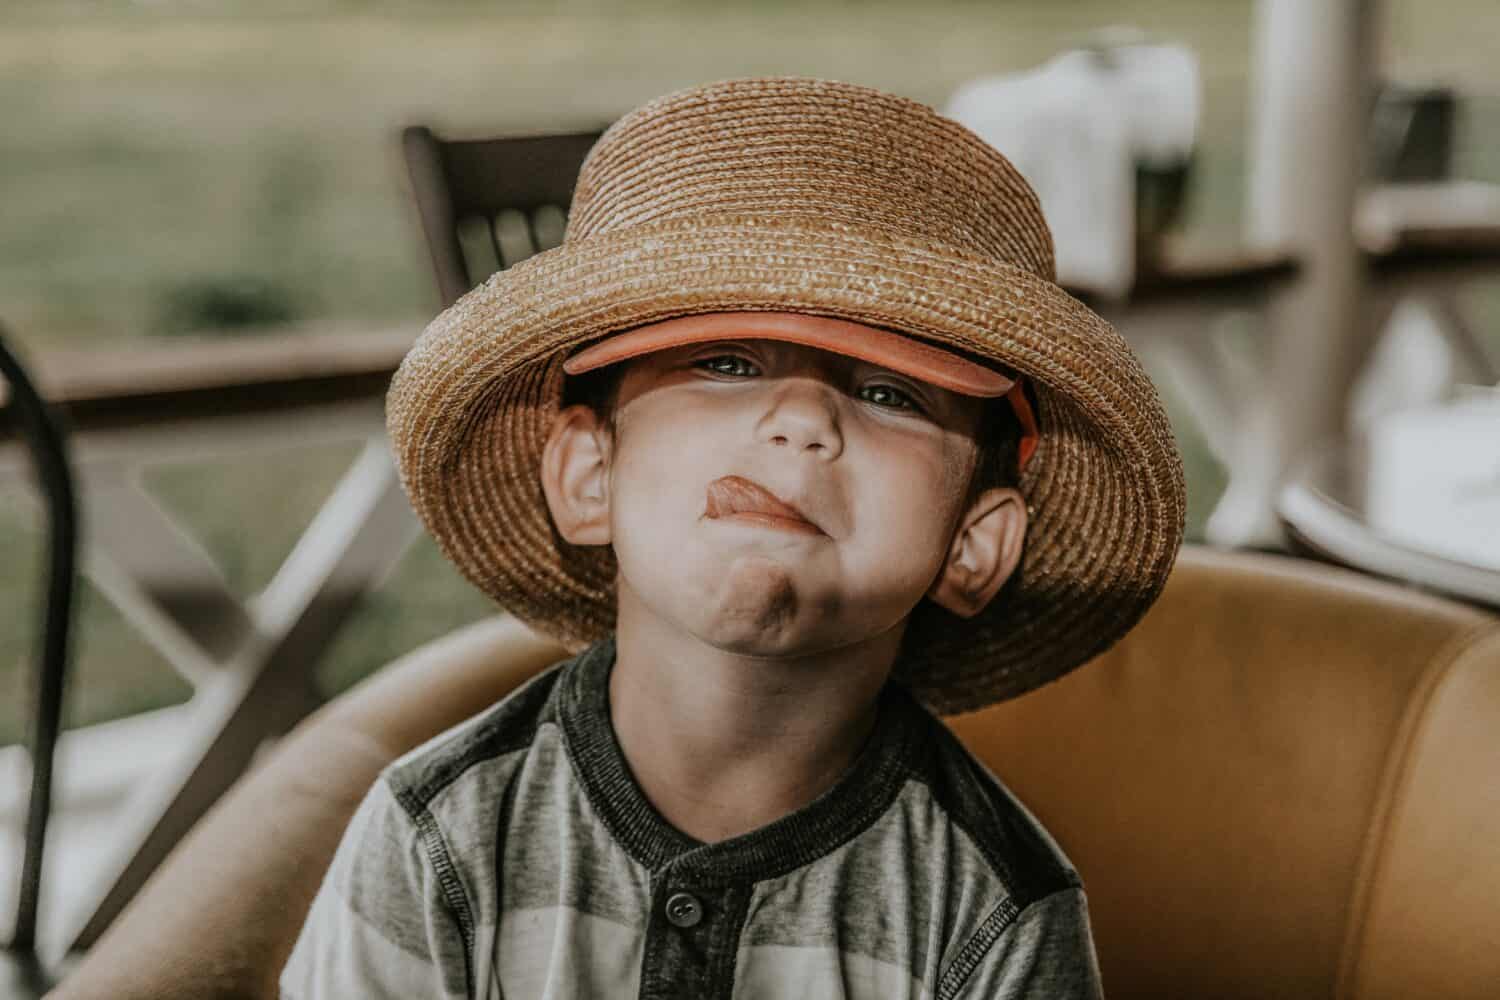 A child in a straw hat is sticking out his tongue and looking at the camera. Soft selective focus